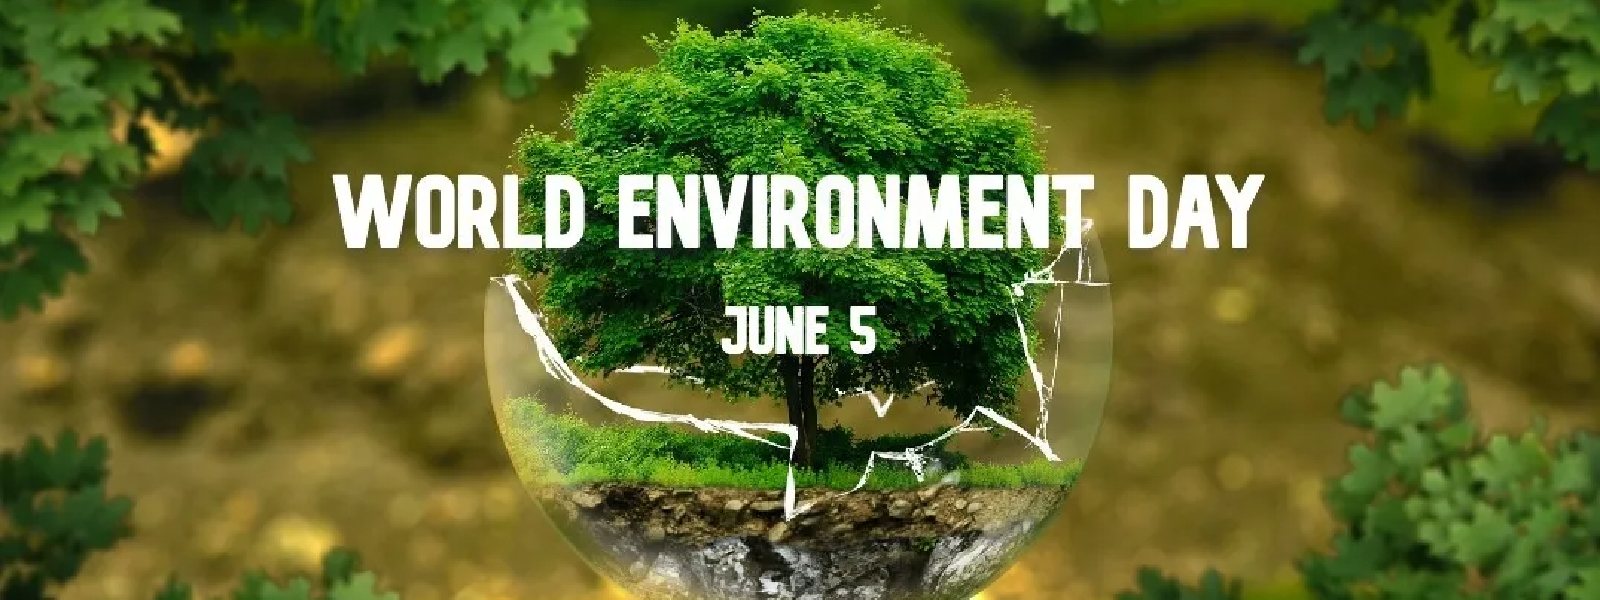 World Environment Day: A Call to Action for Sri Lanka